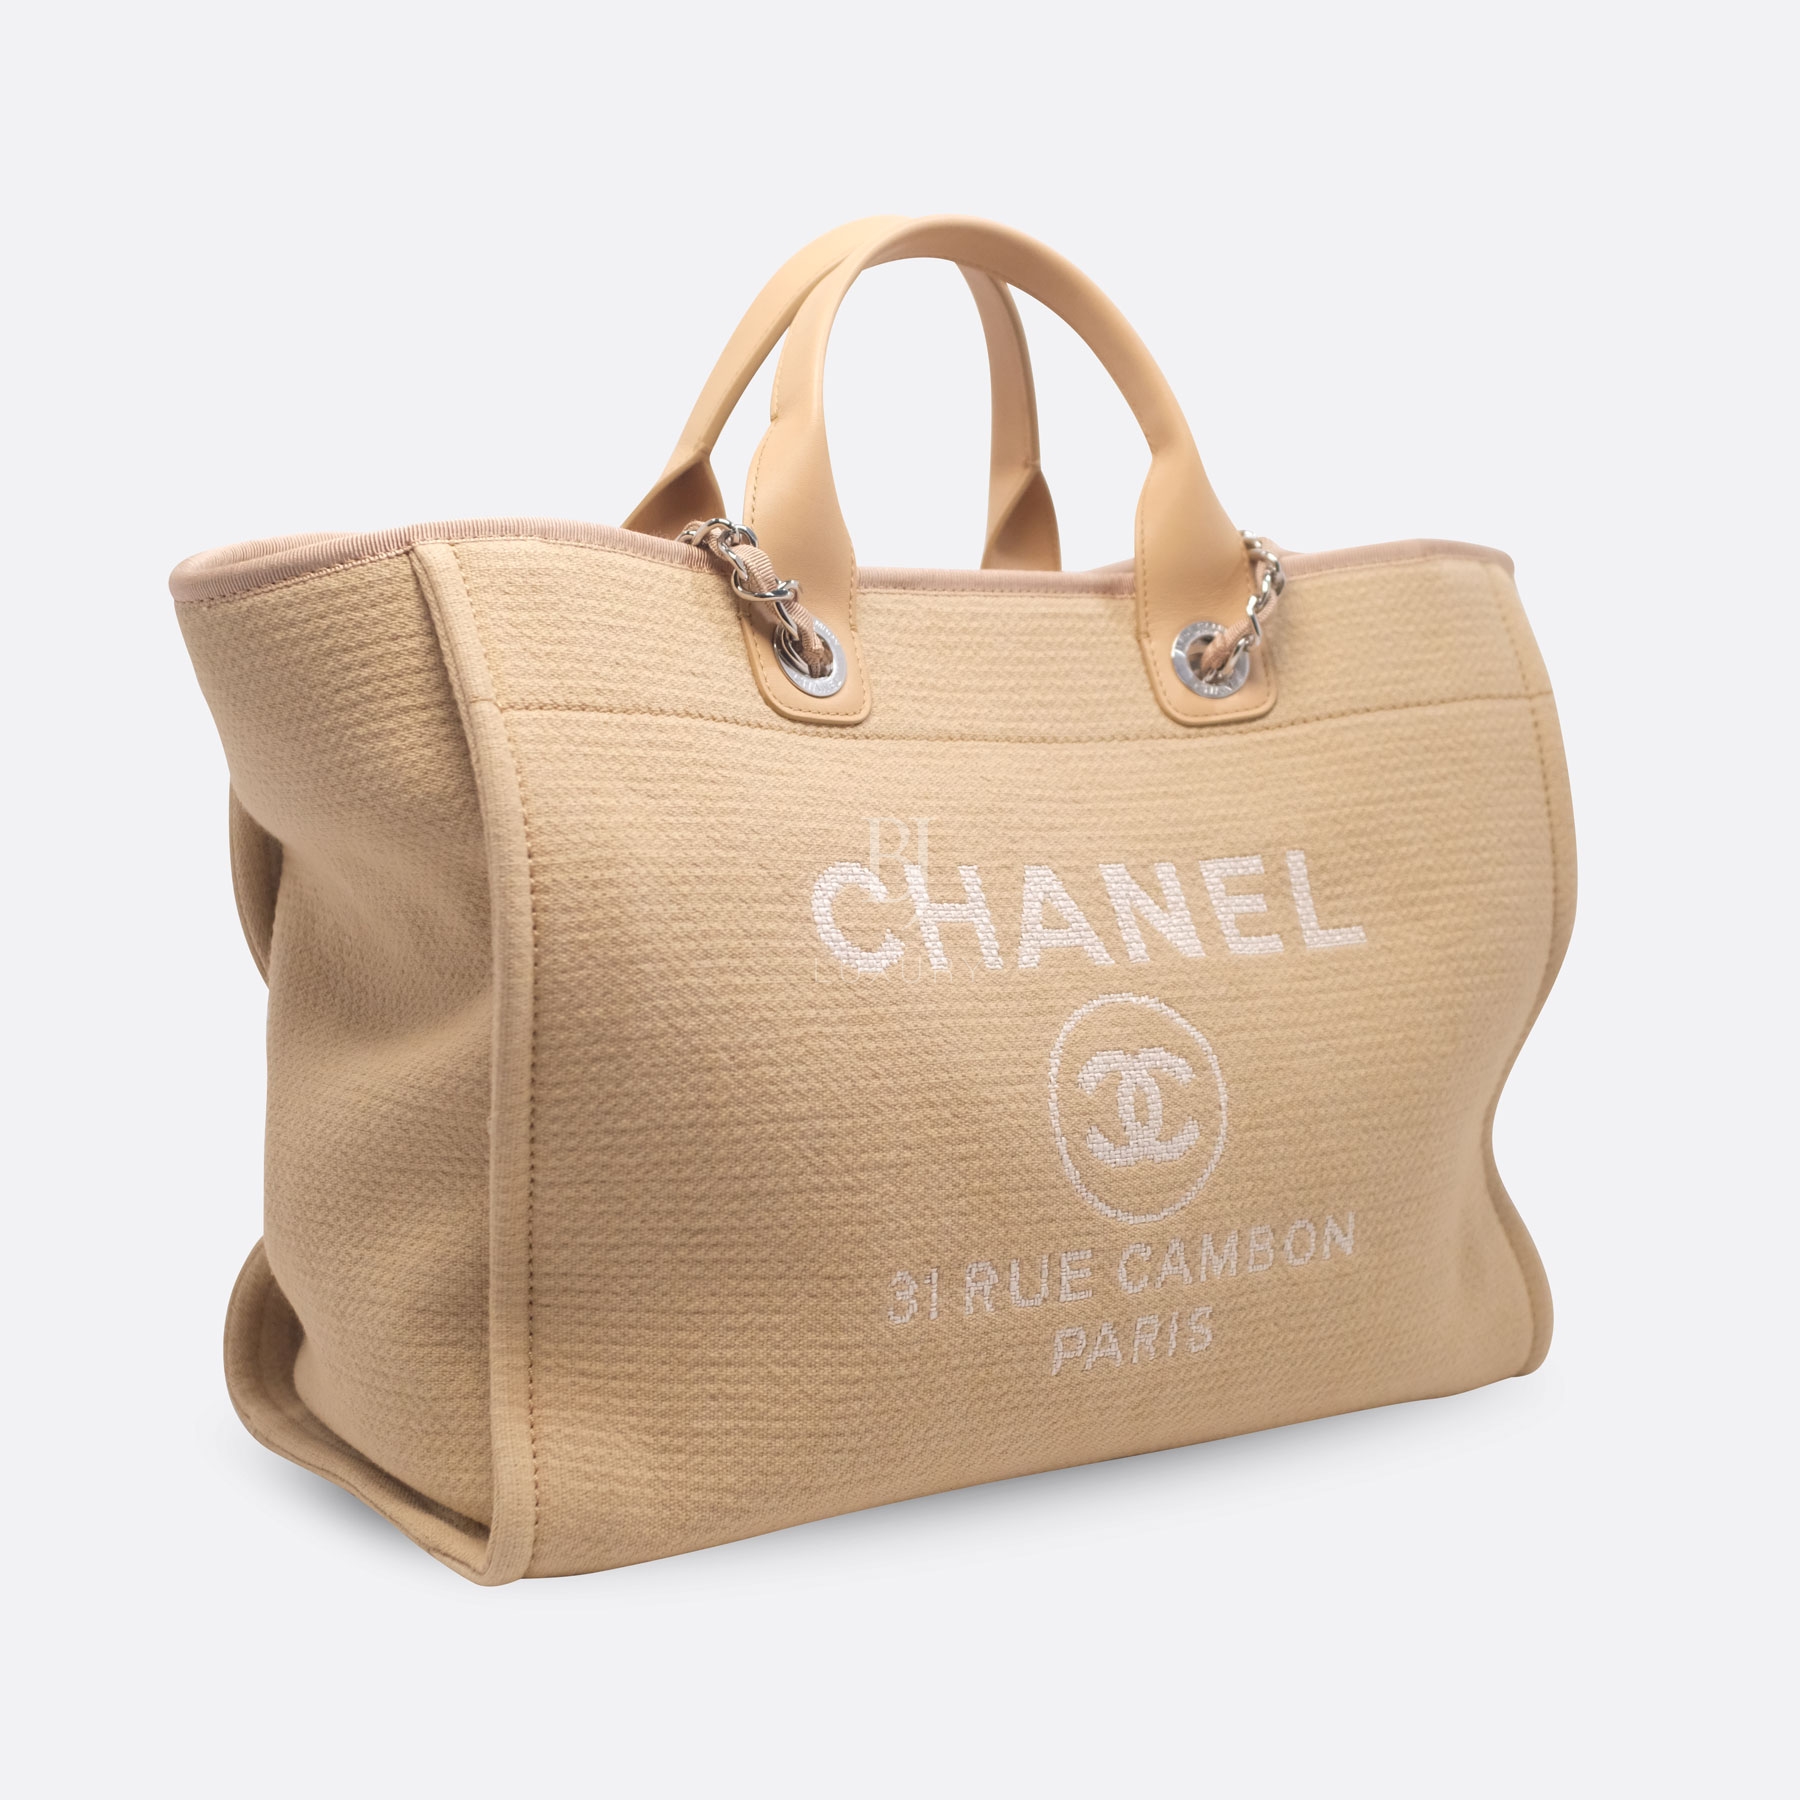 CHANEL TOTE LARGE BEIGE CANVAS - BJ Luxury